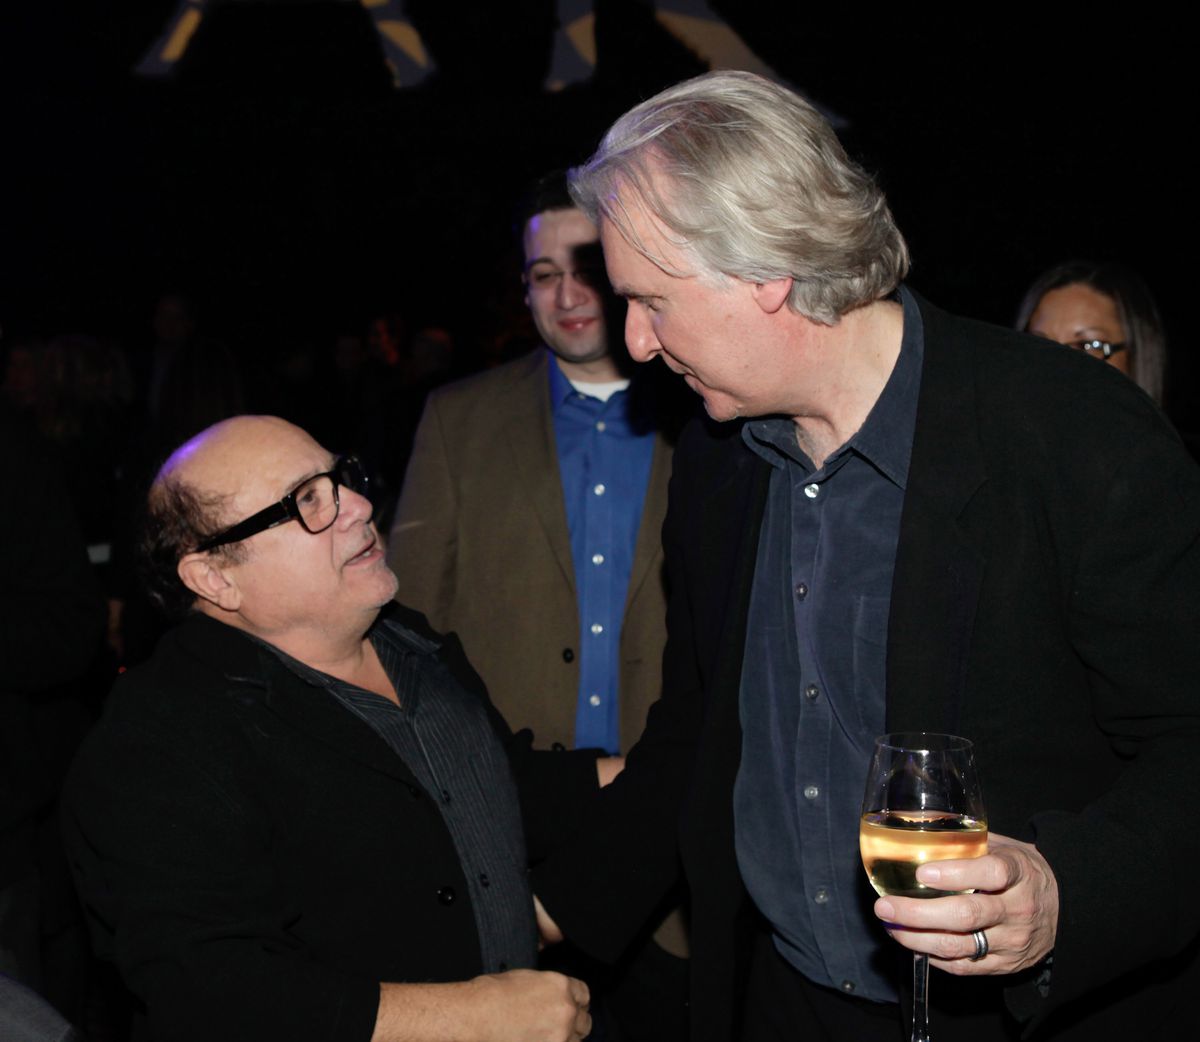 Danny Devito looking up to talk to director James Cameron, who’s holding a glass of white wine at the after party for Avatar